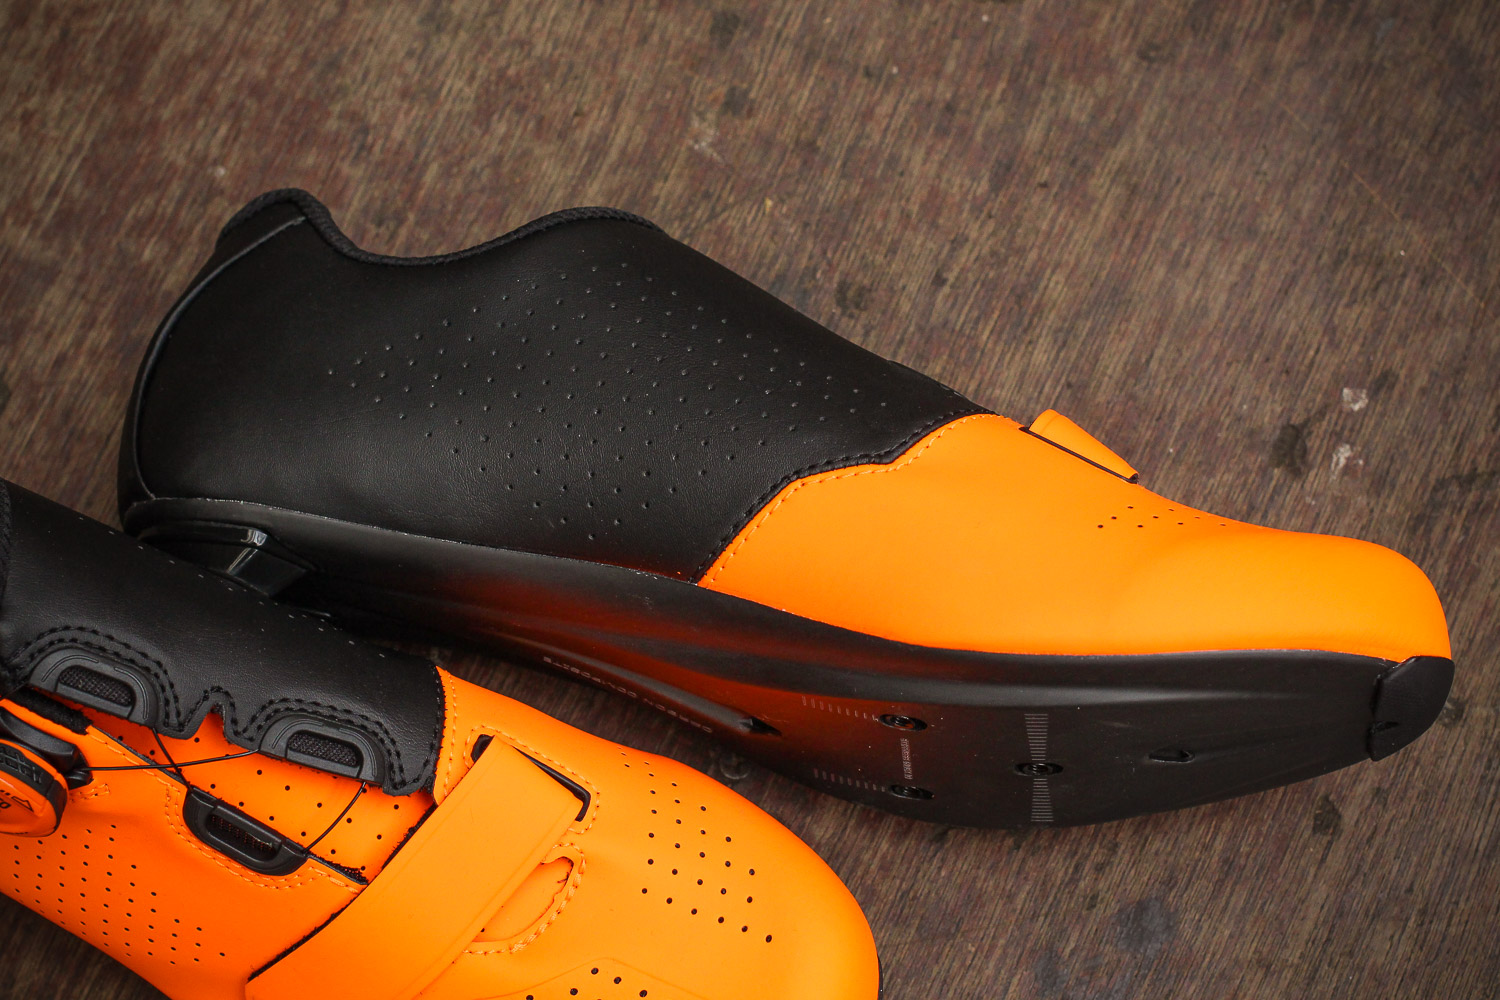 Bontrager Velocis Road Cycling Shoe 